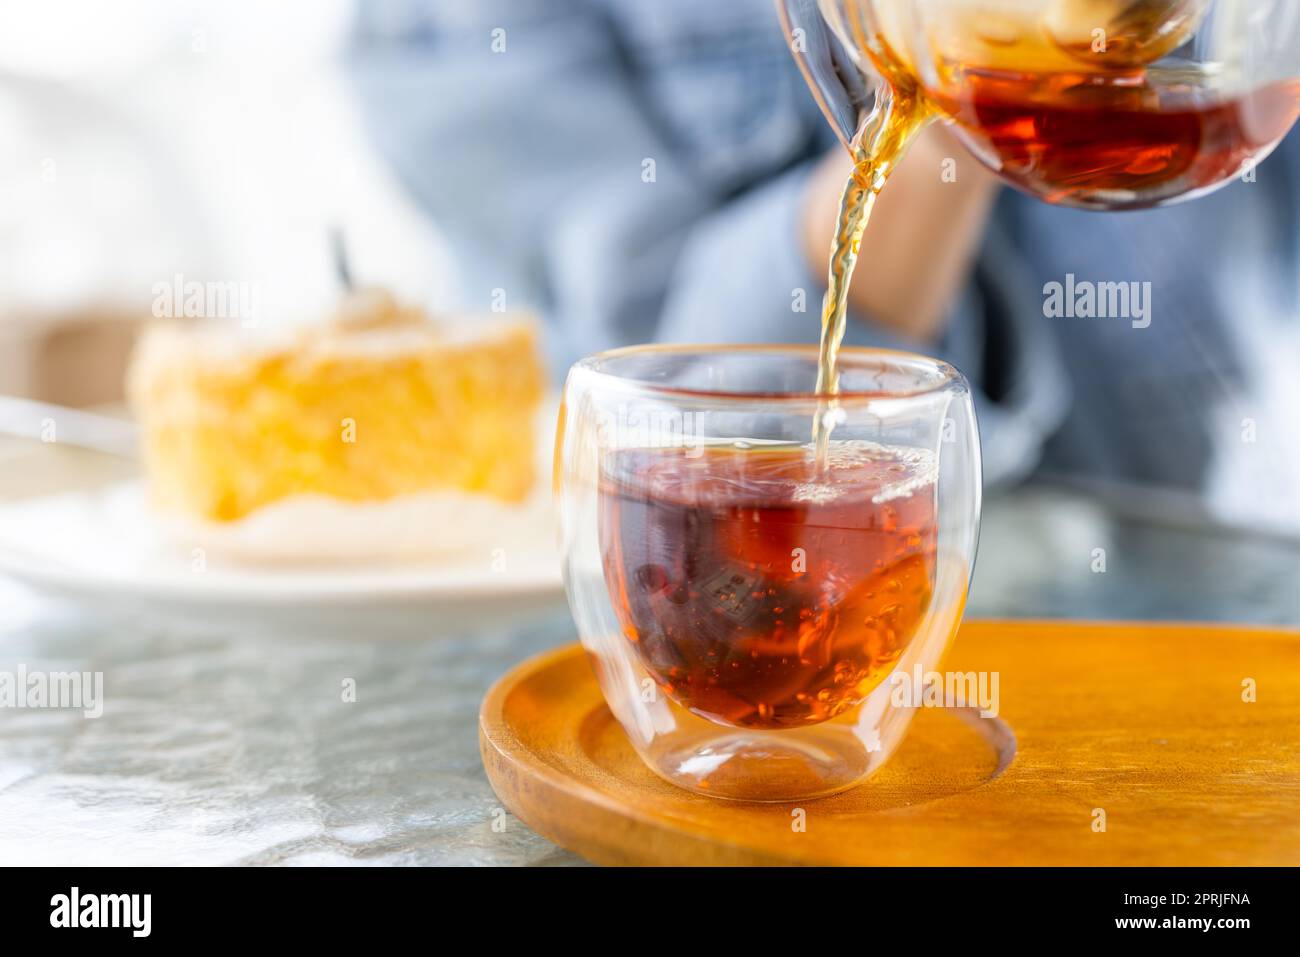 Pouring hot tea at outdoor cafe Stock Photo